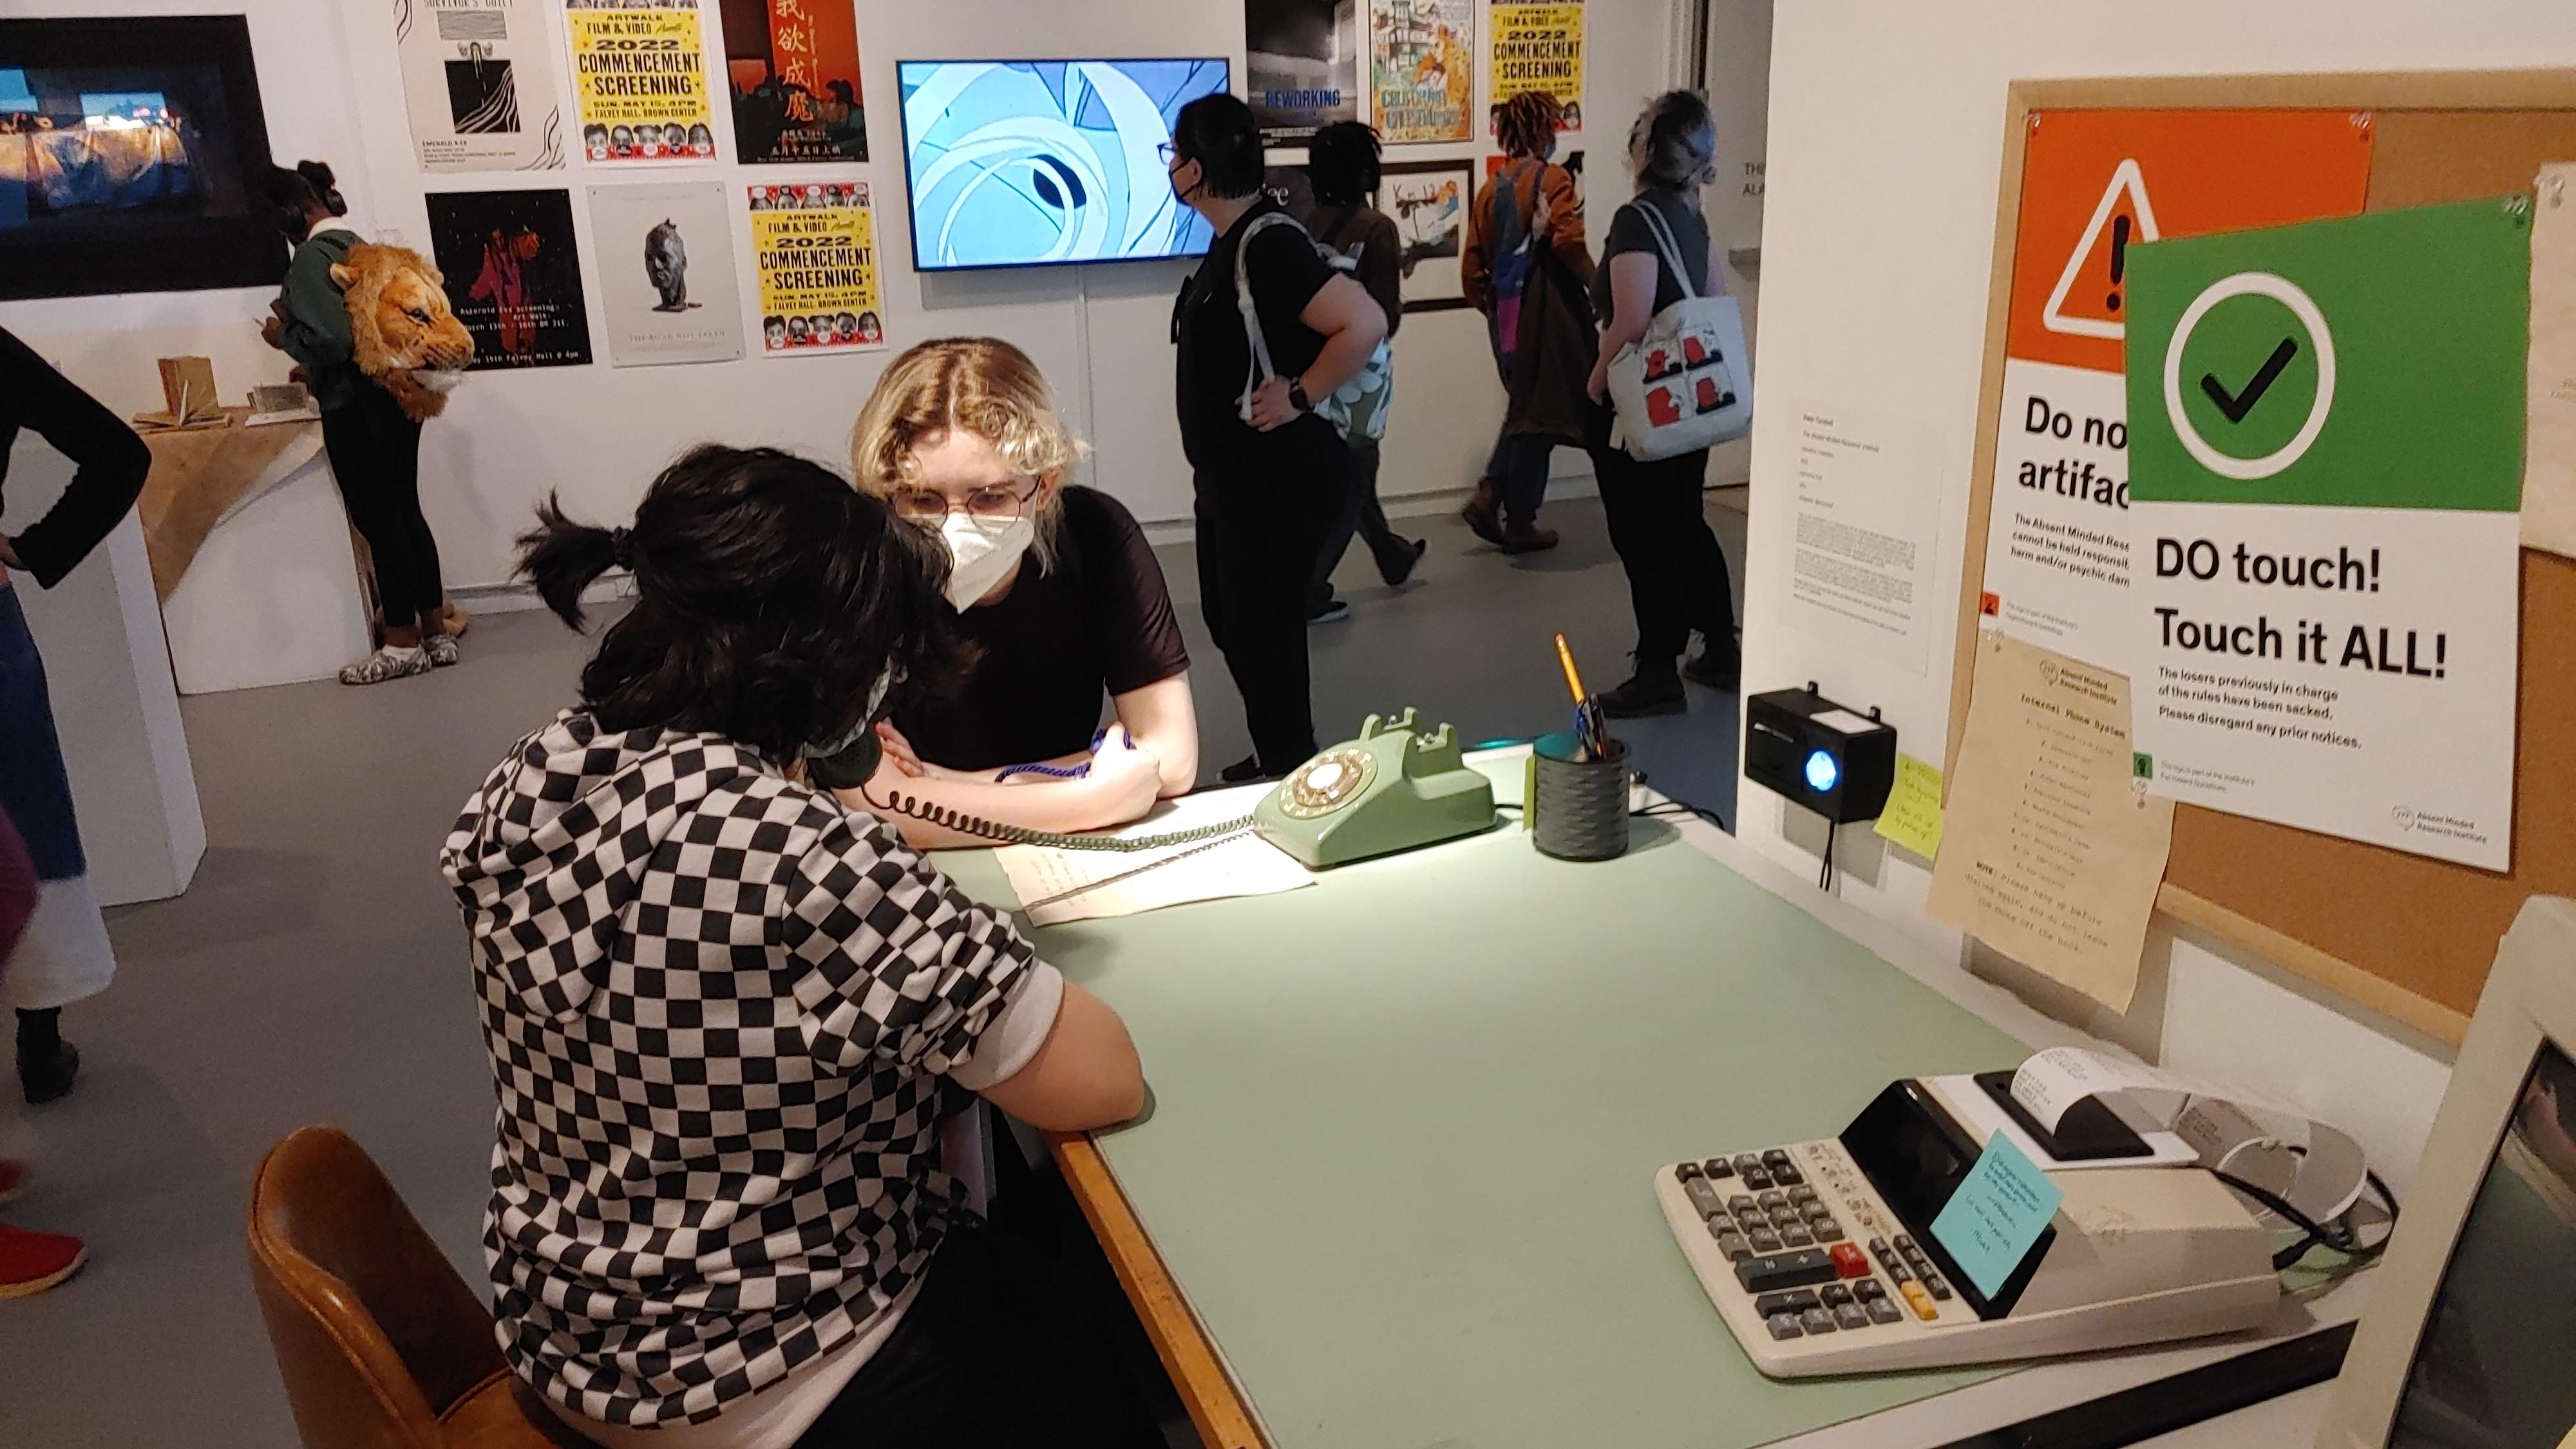 Photograph of thesis project on display. Two people are listening to the rotary phone on the desk.